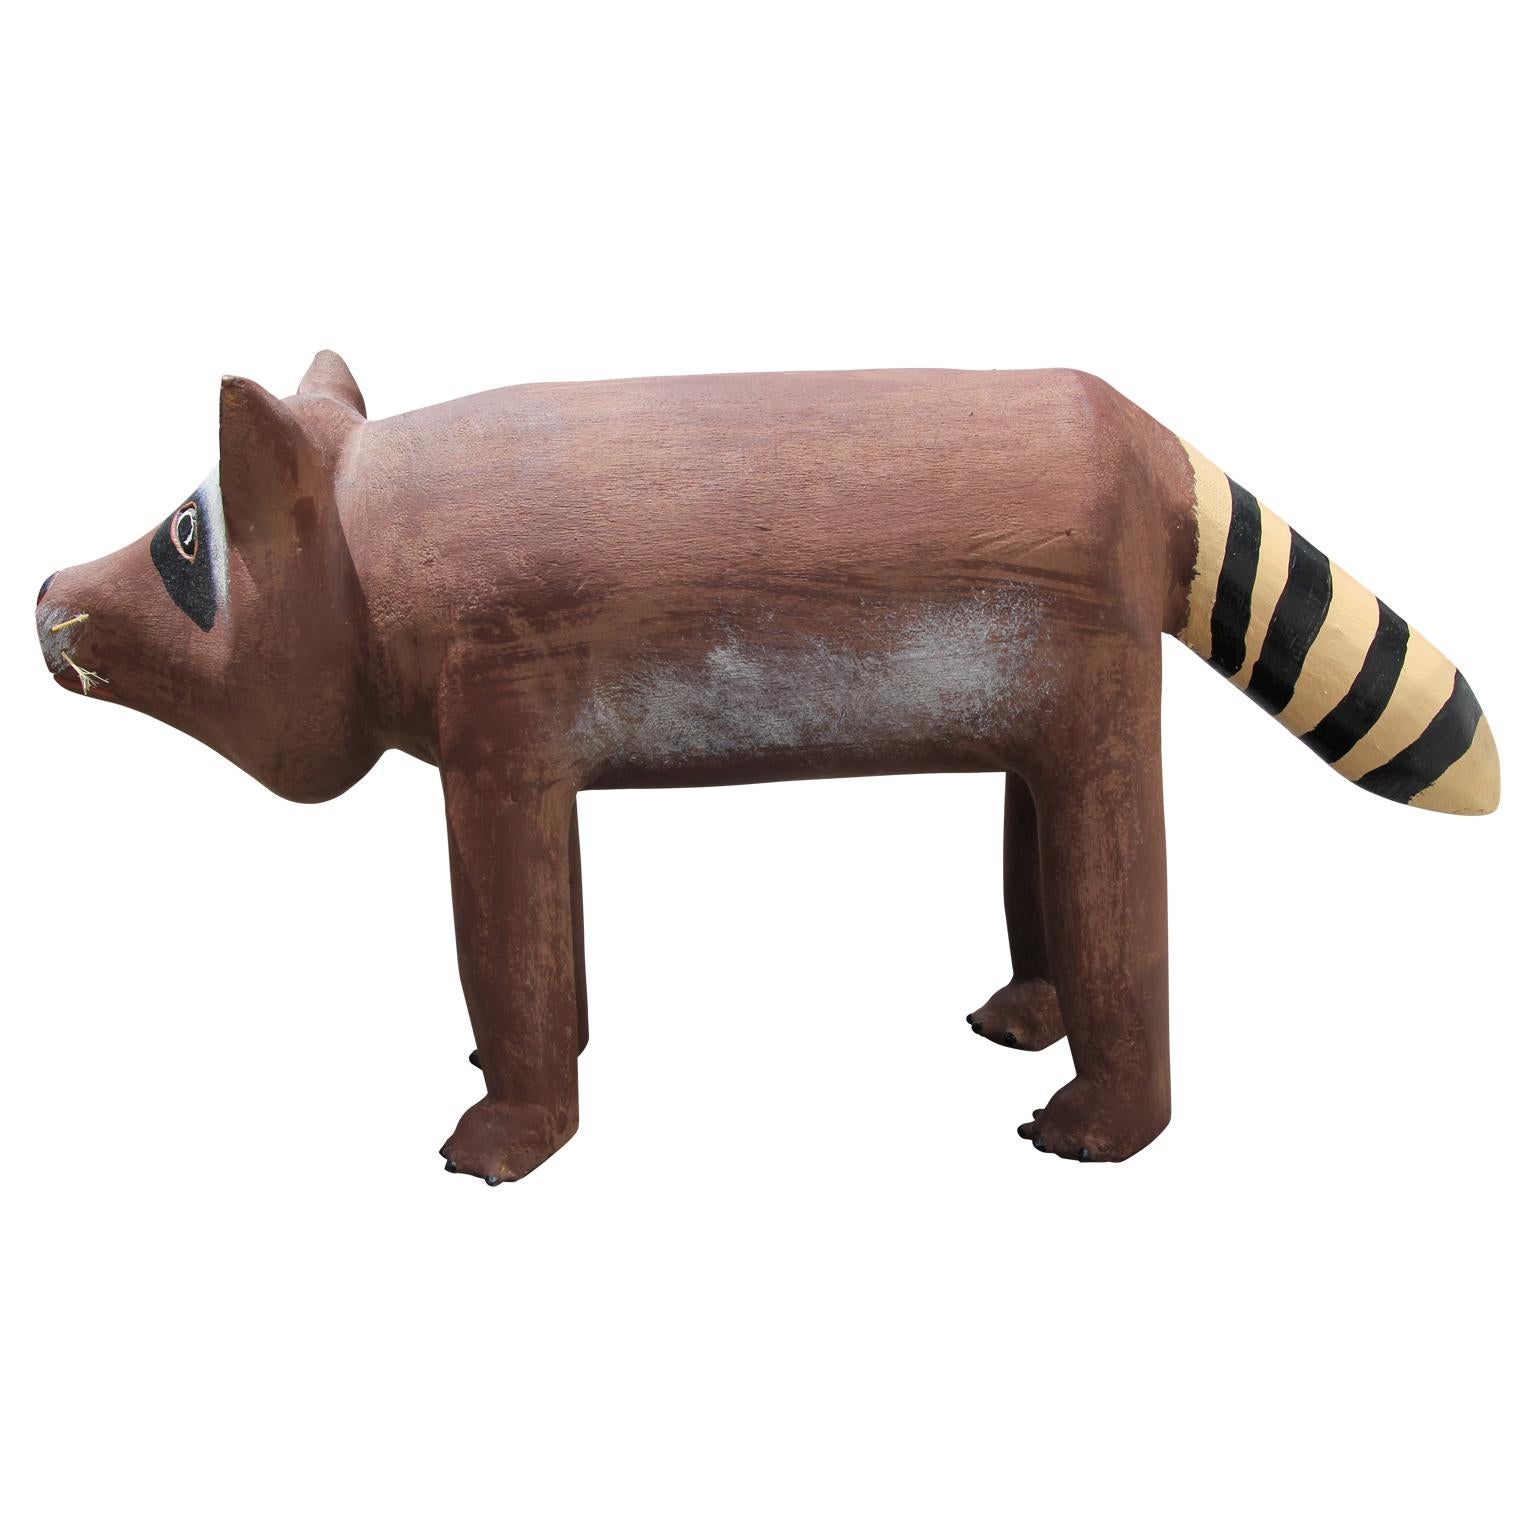 Modern wooden racoon sculpture by folk artist David Alvarez. Carved by hand and then meticulously painted, the sculpture also features natural fiber whiskers. Signed underneath by the artist.

Artist Biography: David Alvarez (1953–) discovered his